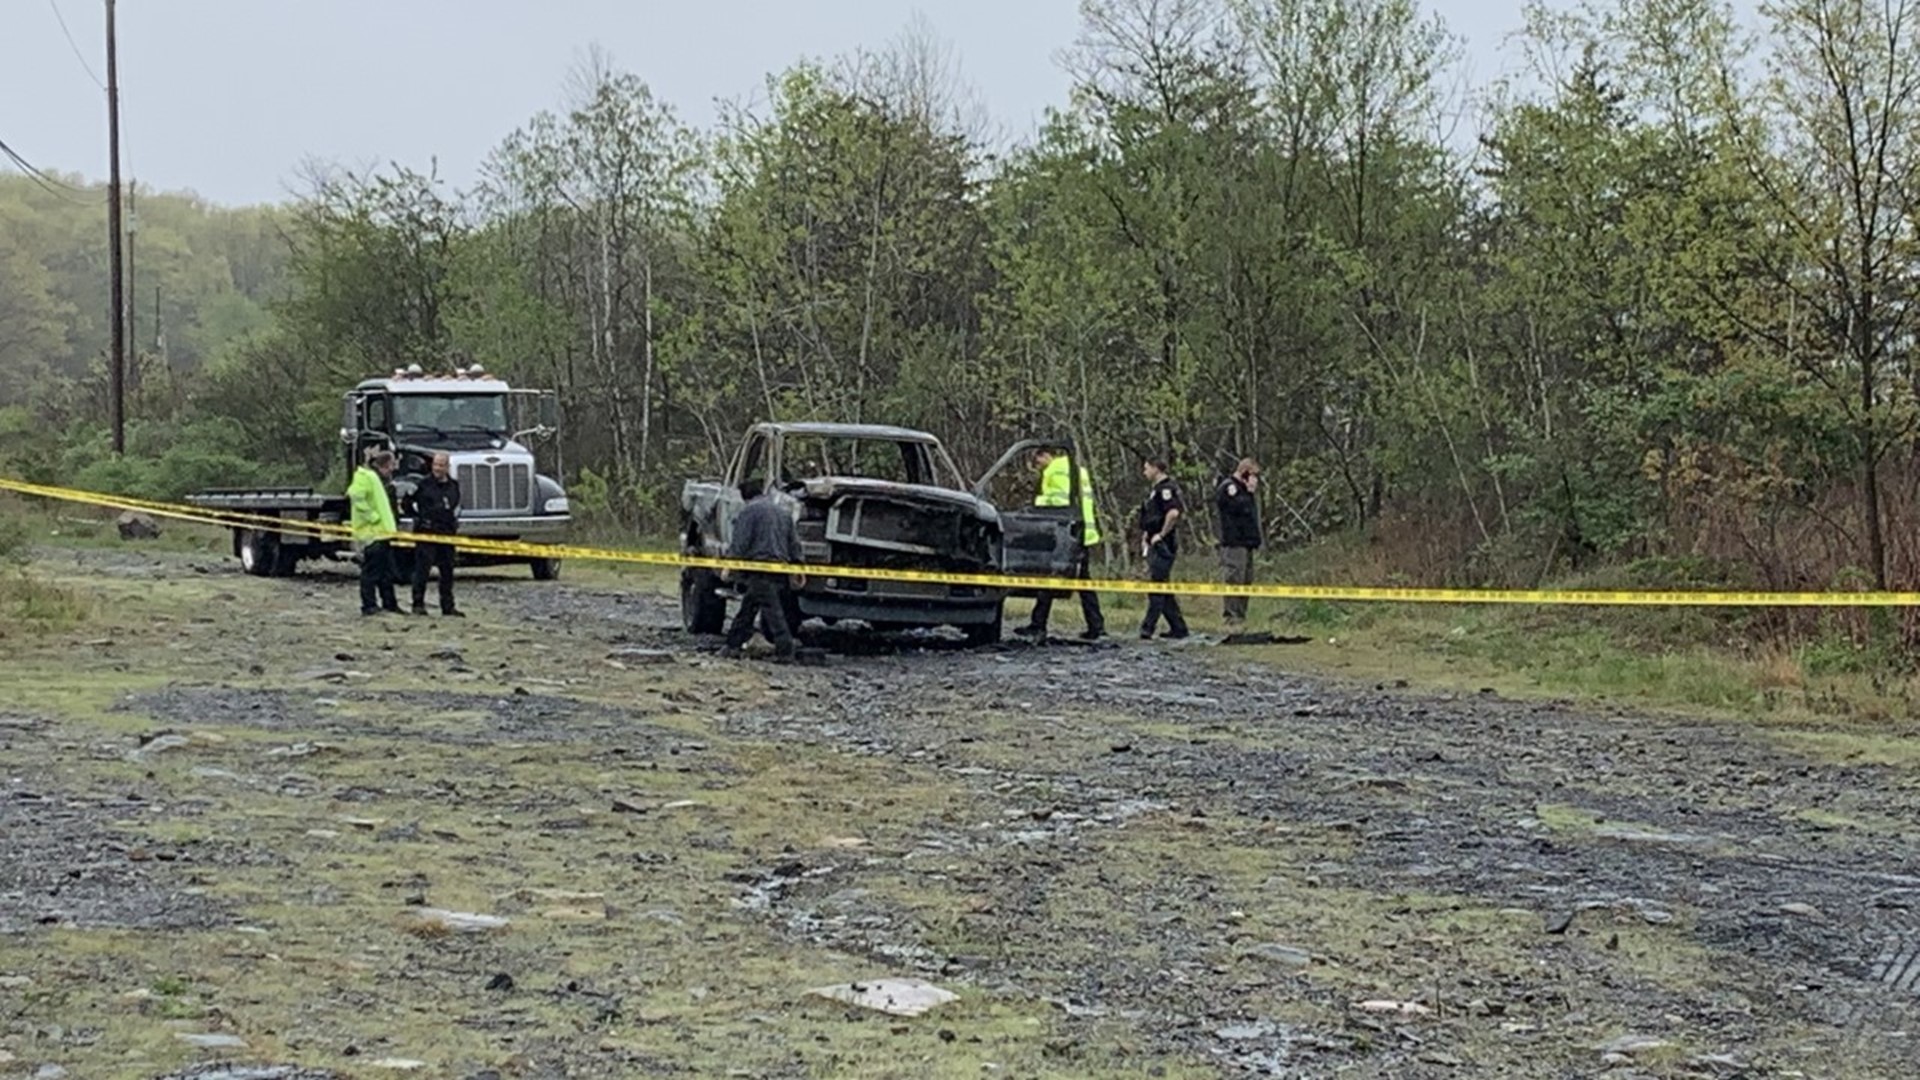 Police are investigating after a body was found near a car fire along Burma Road in St. Clair Saturday morning.